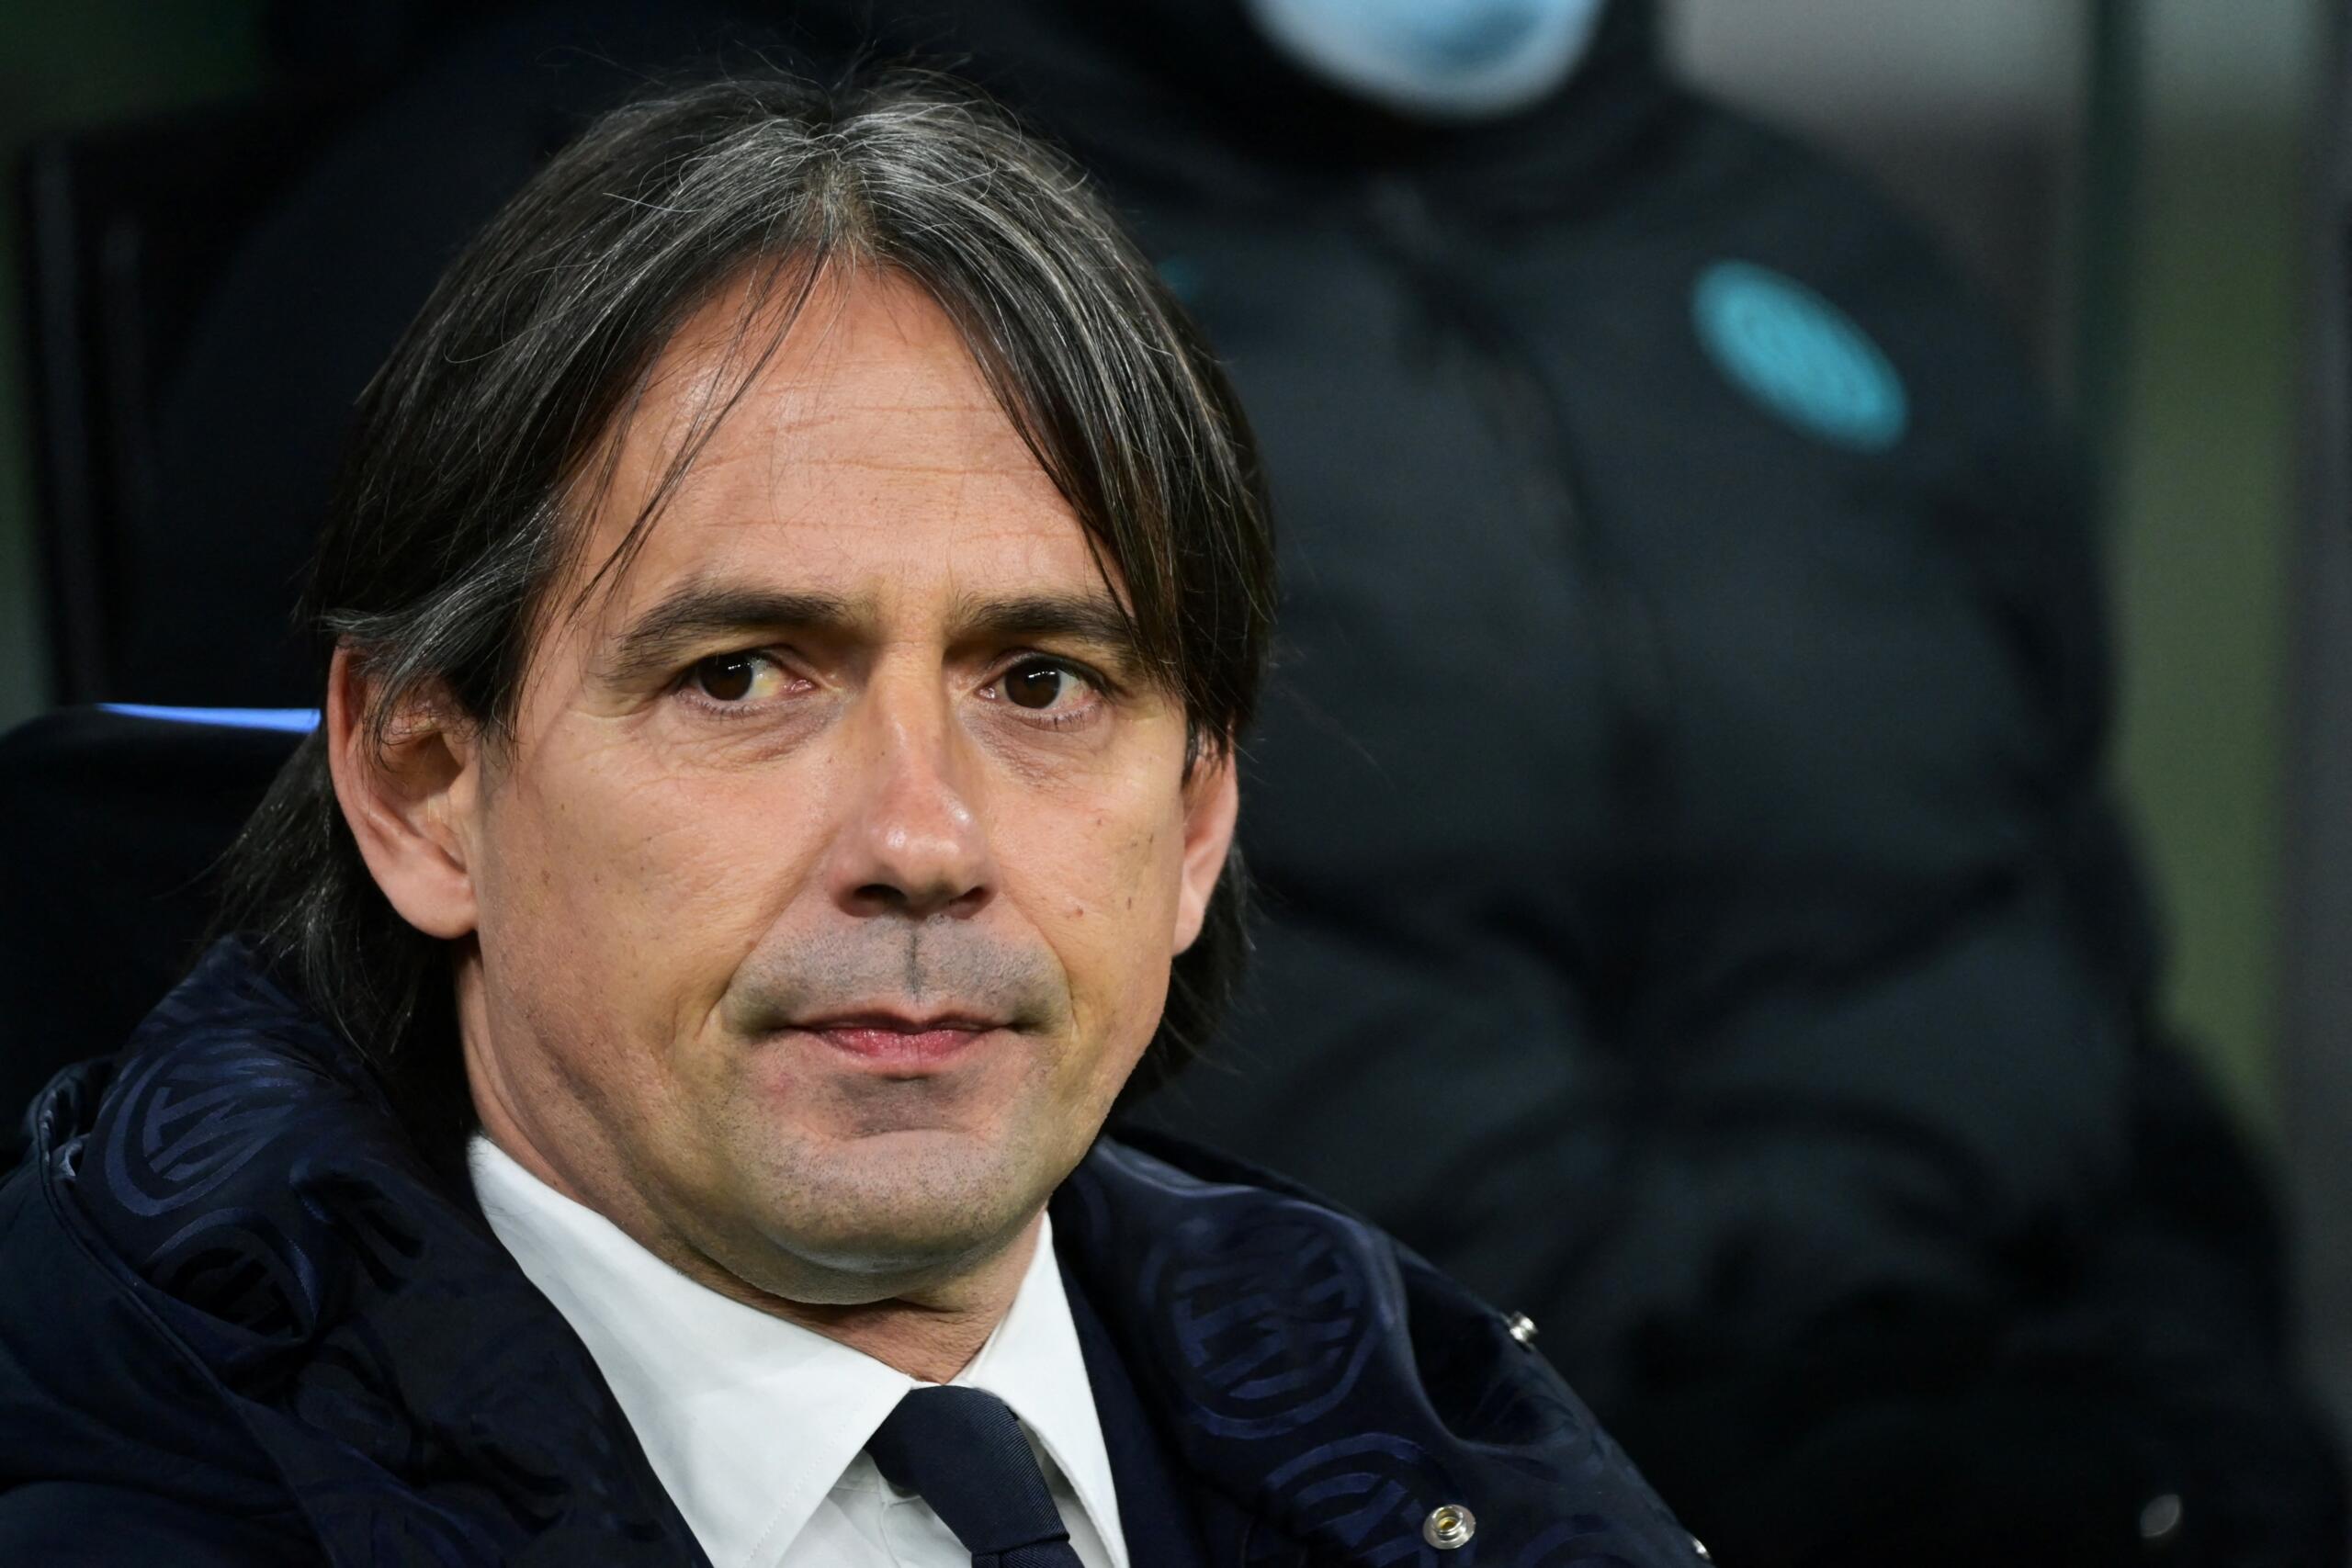 Inter coach Simone Inzaghi sat down with the press to discuss the Derby: “We are headed for an intense stretch that will be very stimulating."